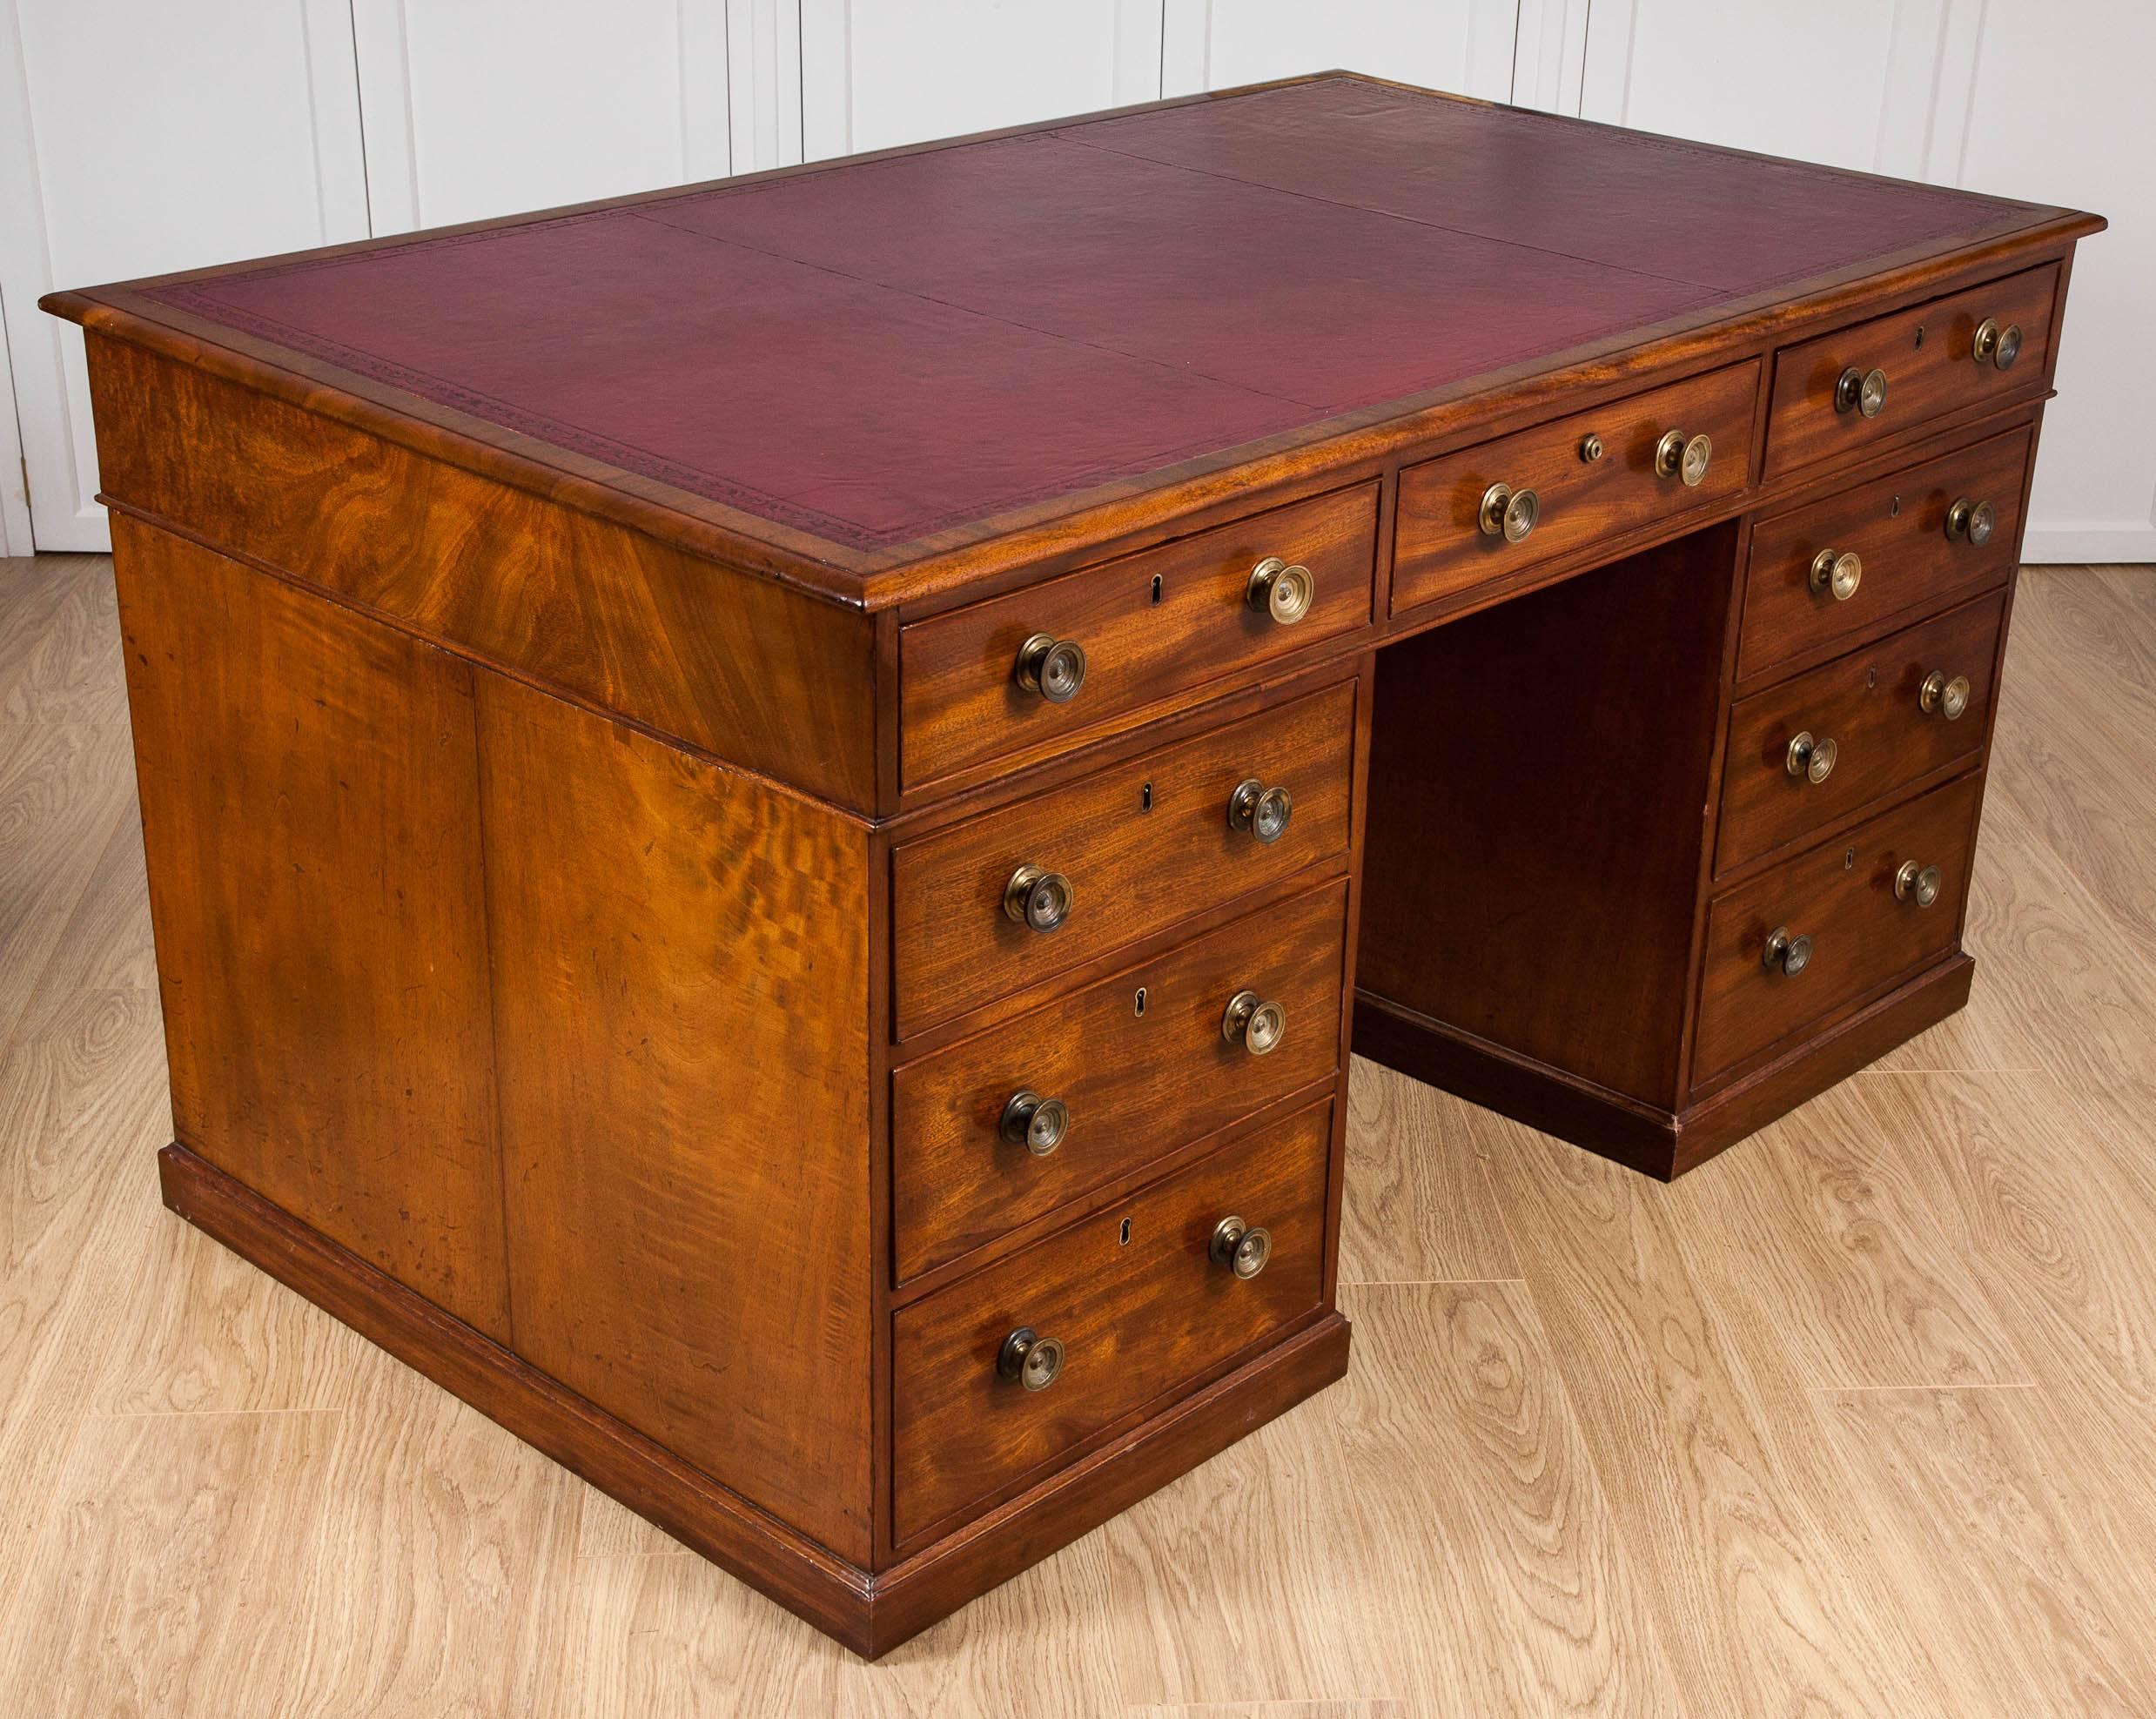 Regency Period Early 19th century Mahogany Partners Desk with drawers both sides In Excellent Condition For Sale In London, GB